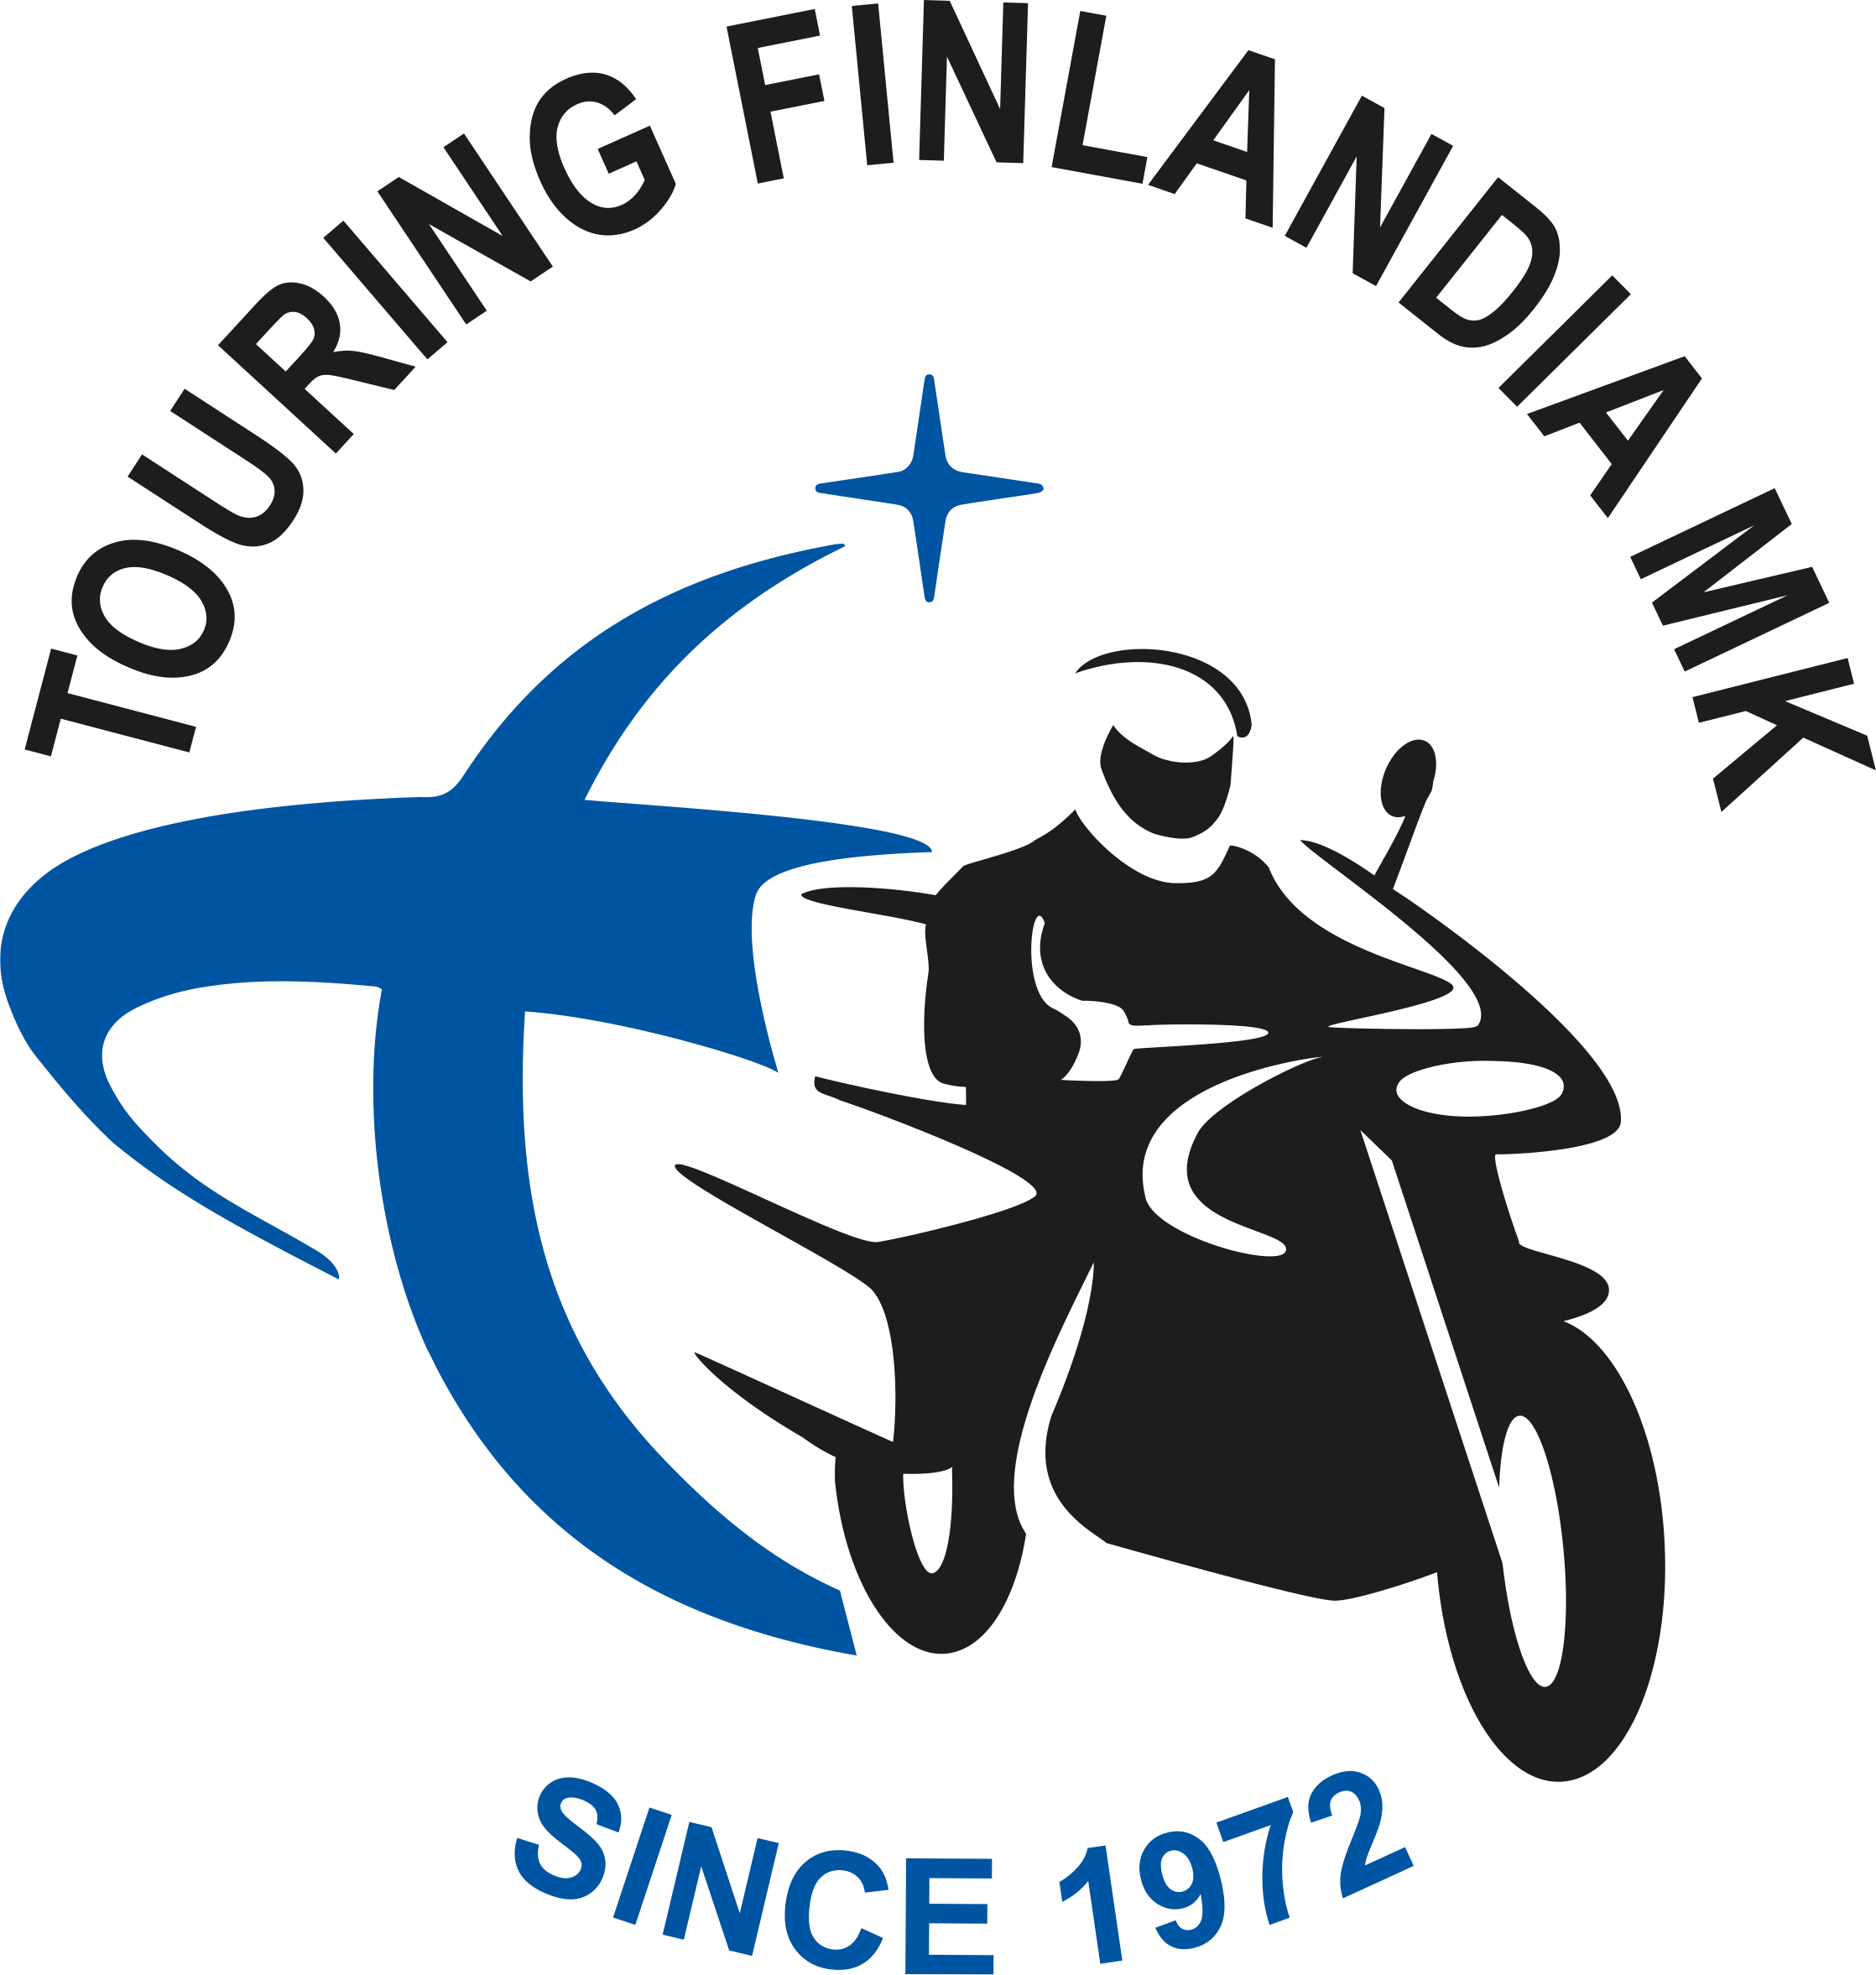 Touring Finland